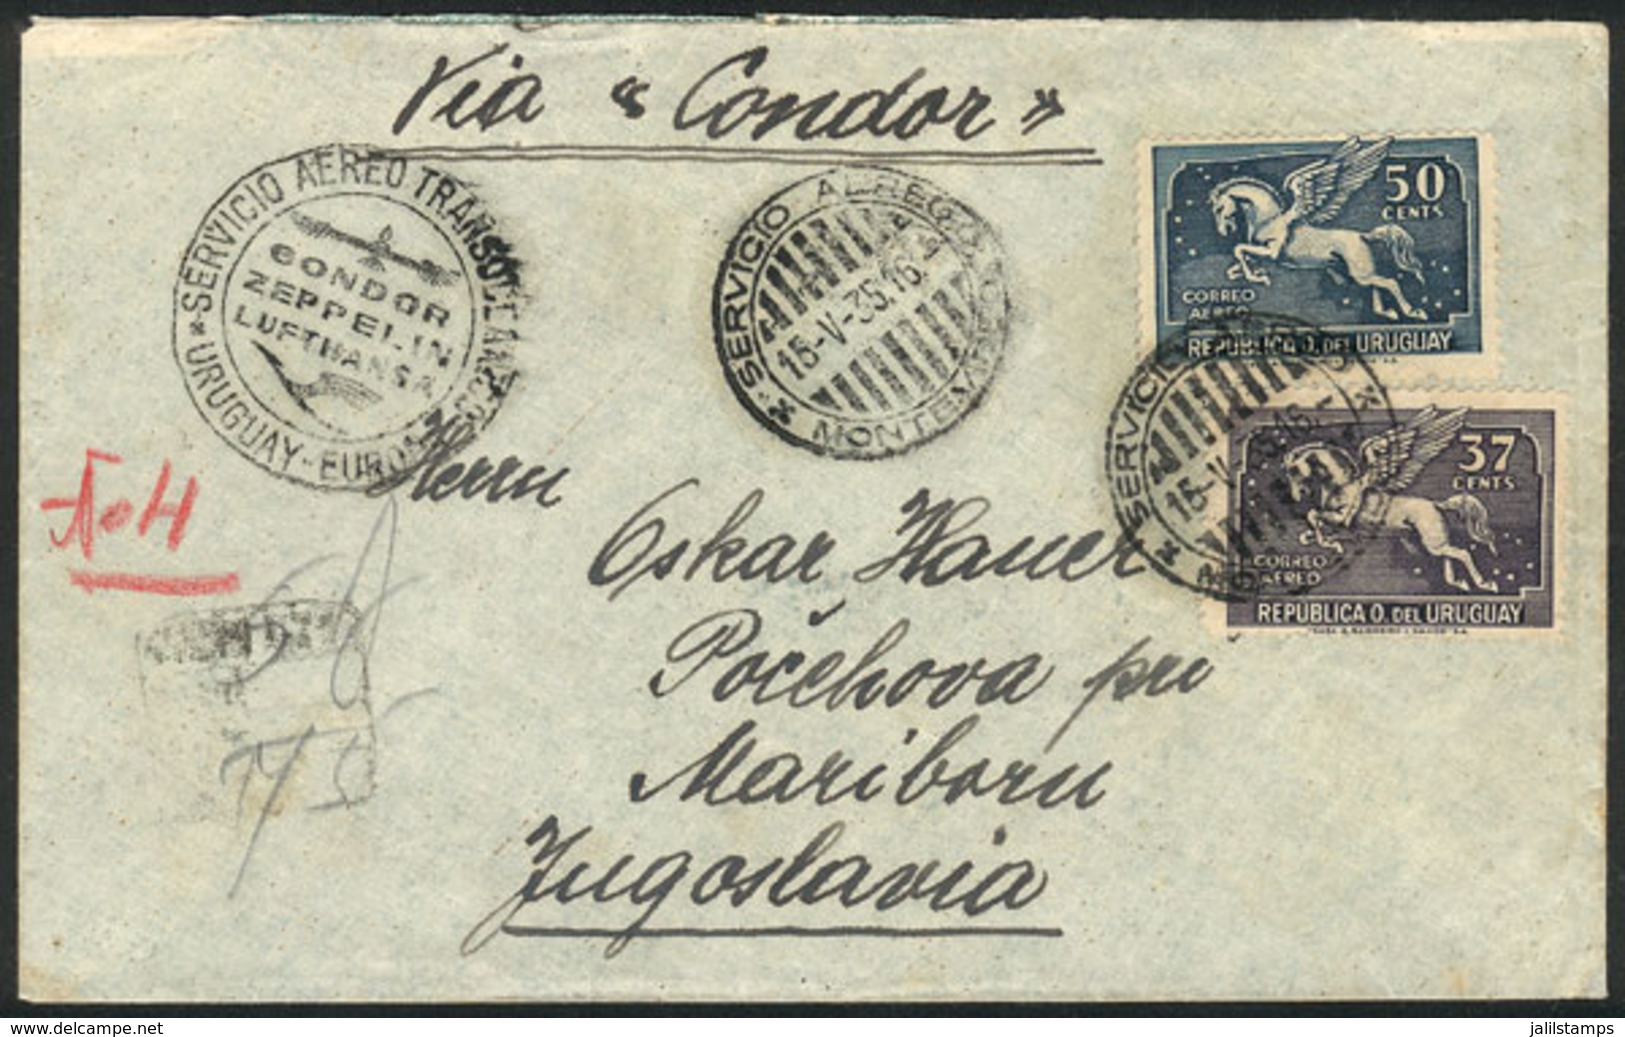 URUGUAY: Airmail Cover Sent To Yugoslavia On 15/MAY/1935 Franked With 87c., VF Quality, Unusual Destination! - Uruguay